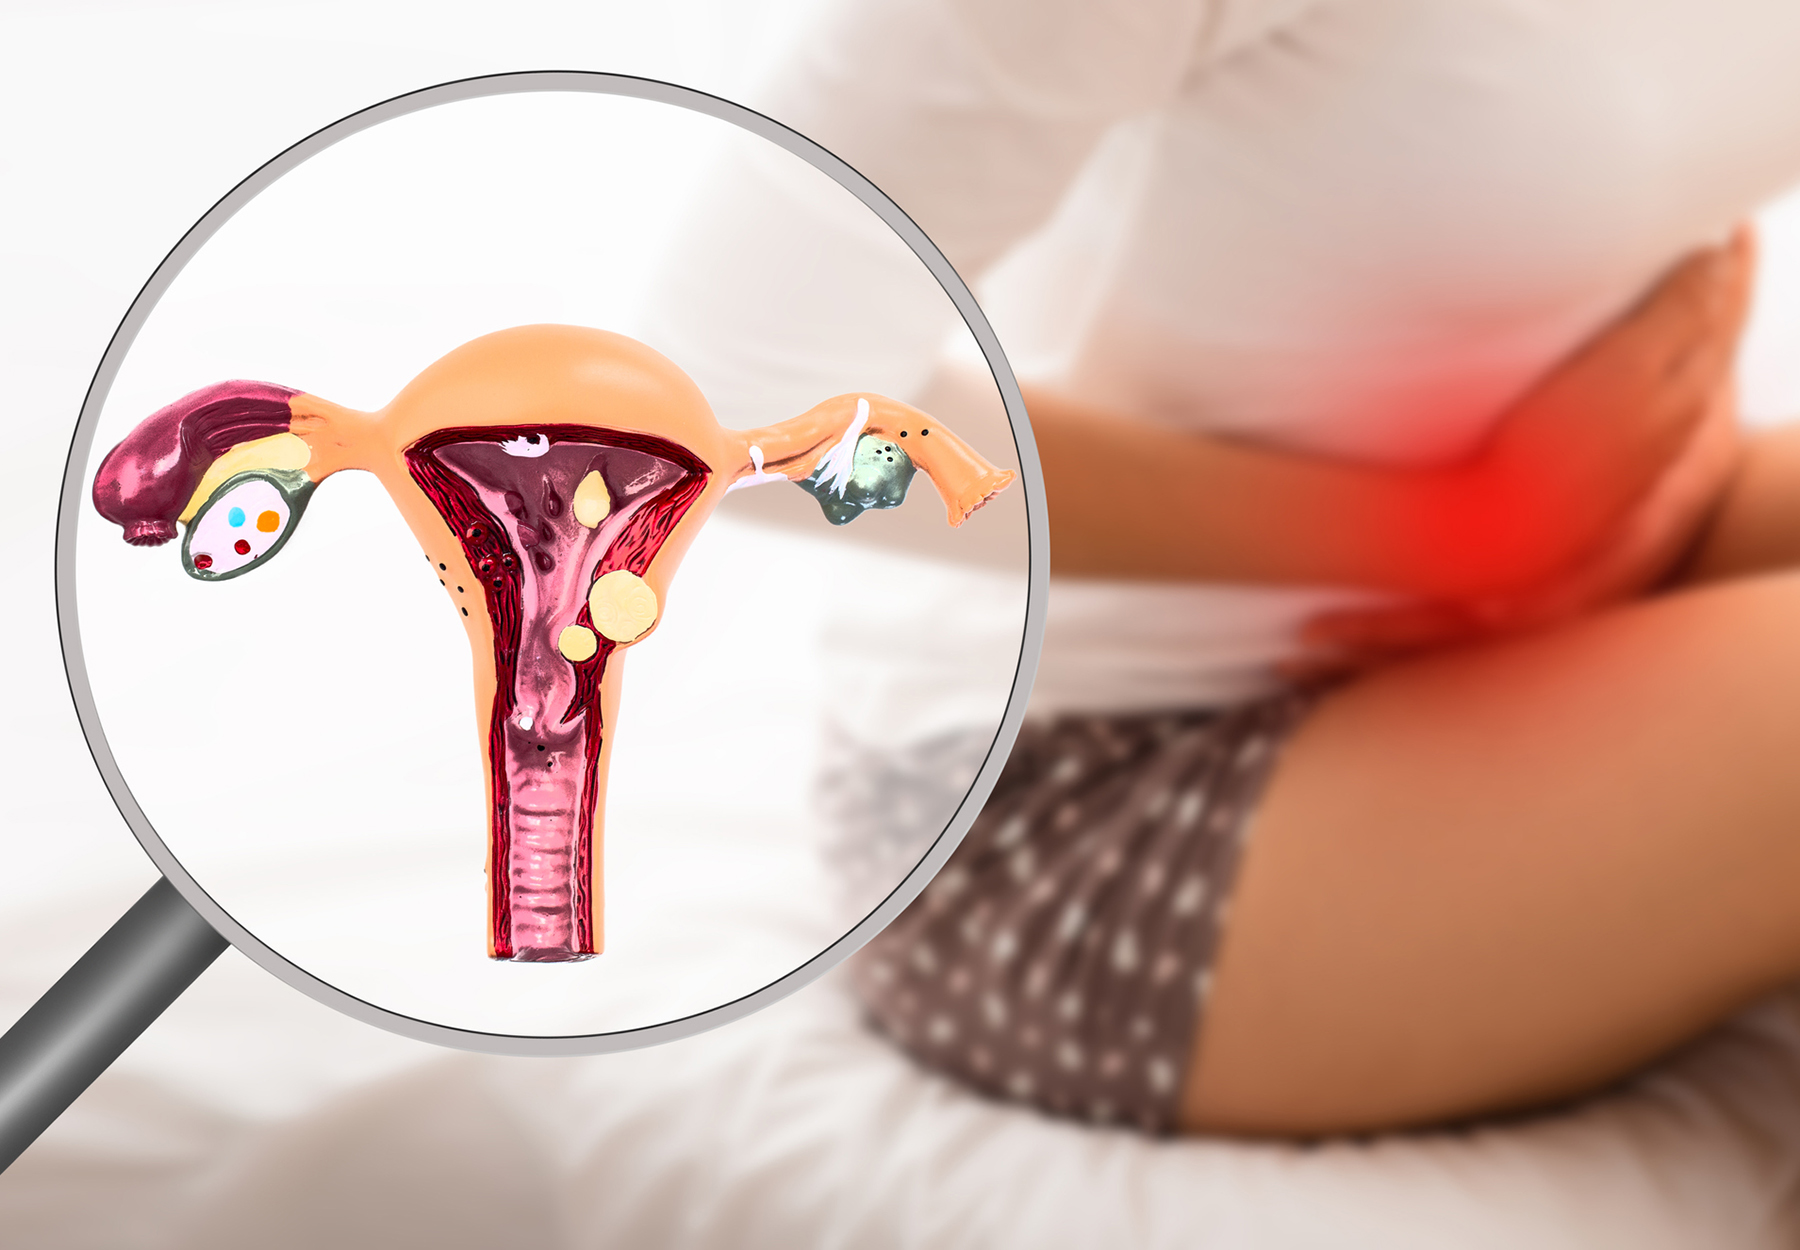 Endometriosis, virtual model of the uterus, close-up. Woman suffering from menstrual pain, while sitting on bed.